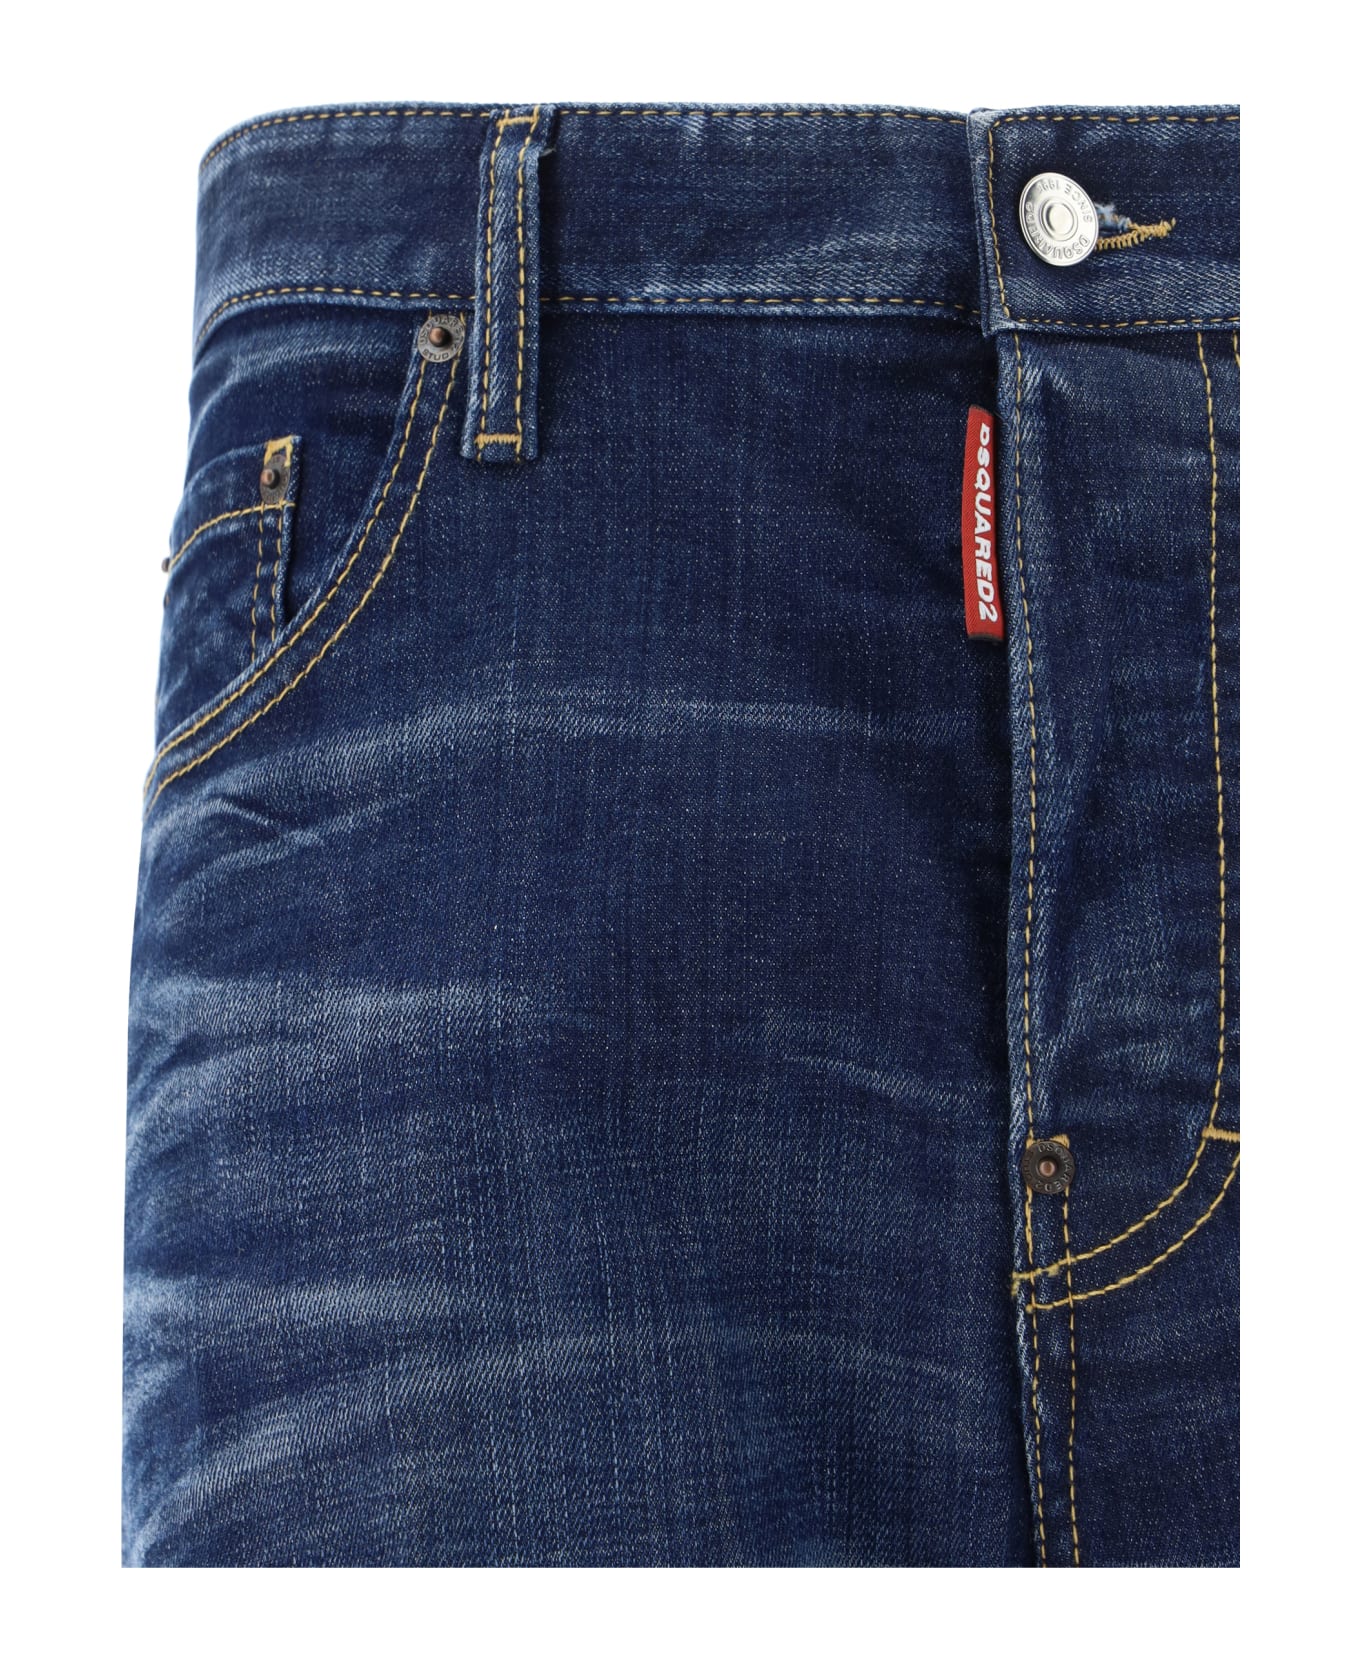 Dsquared2 642 Jeans - 470